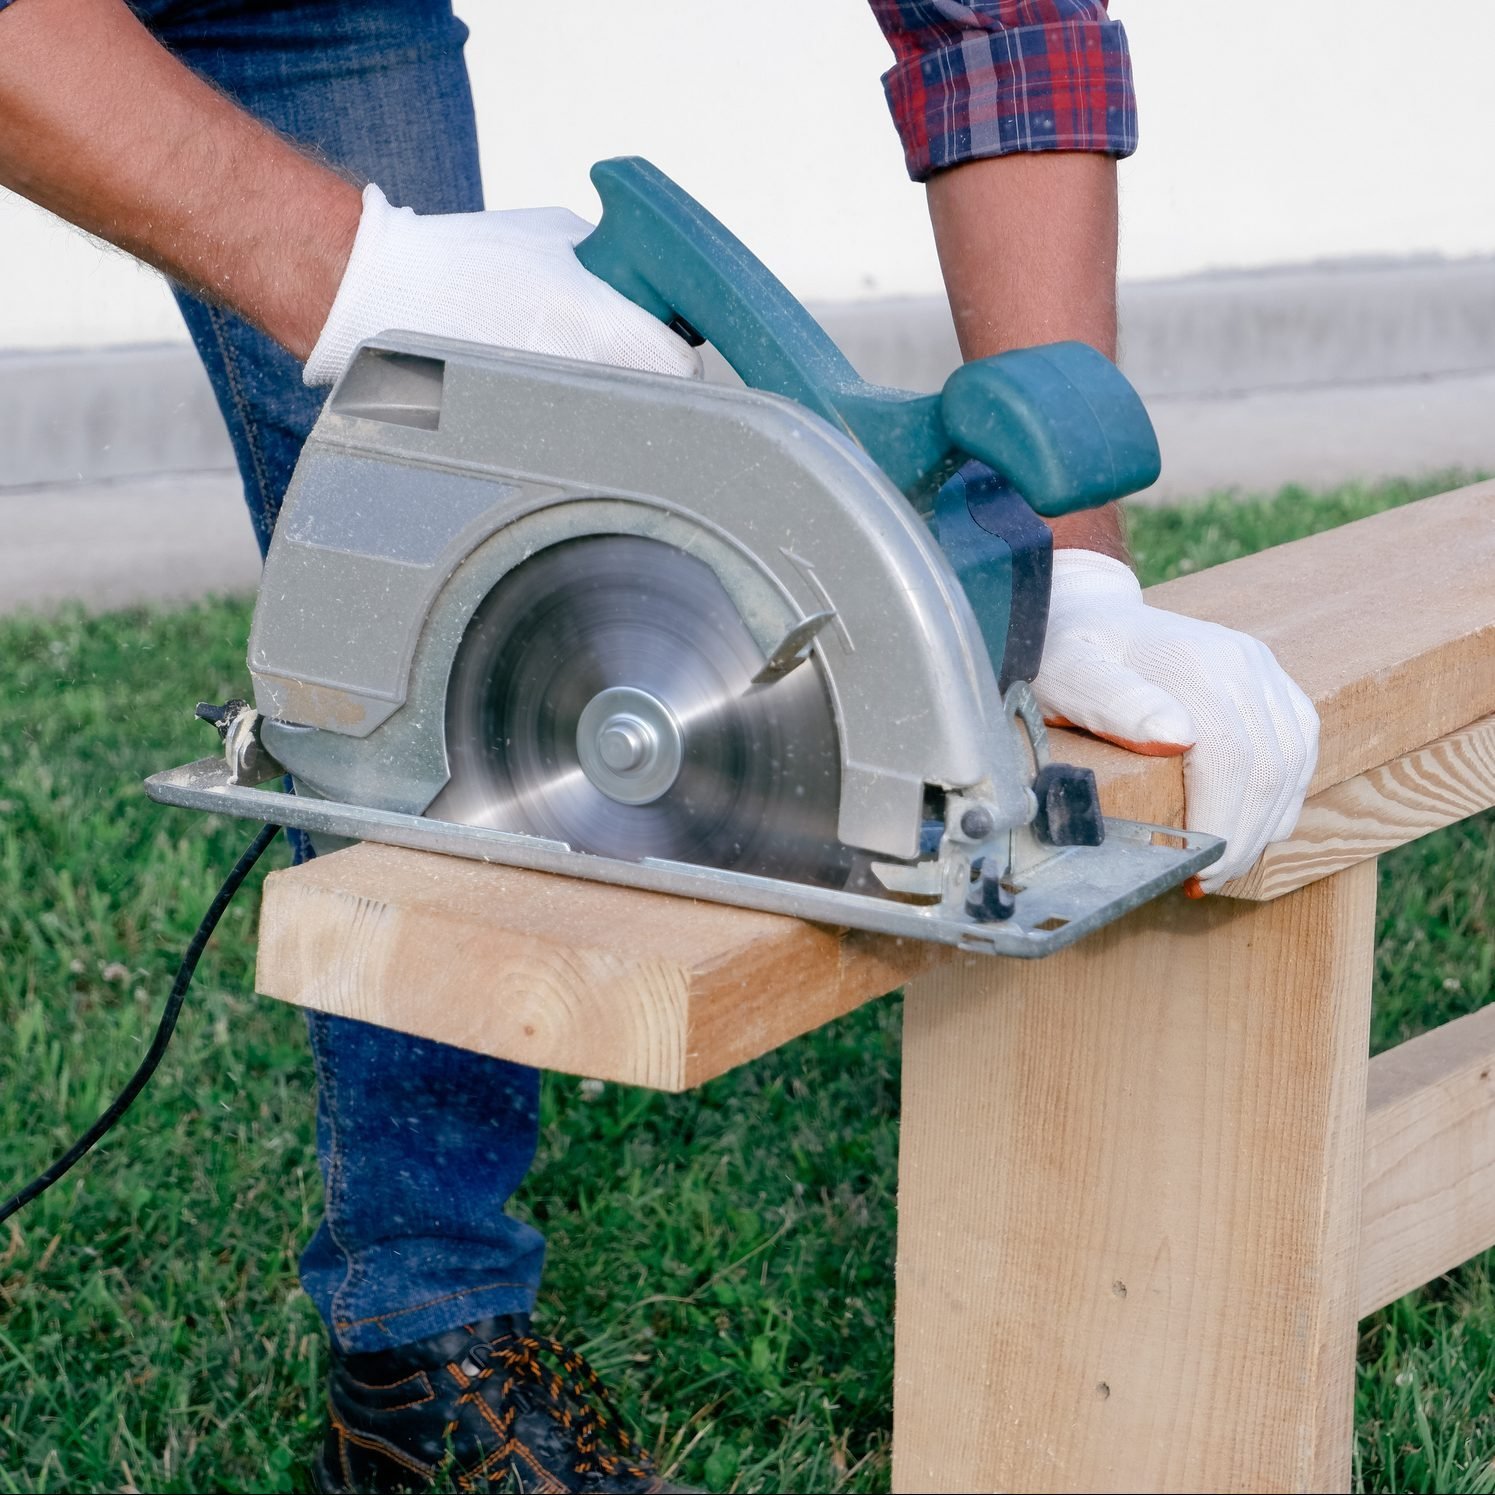 How To Use a Circular Saw to Make Long Cuts